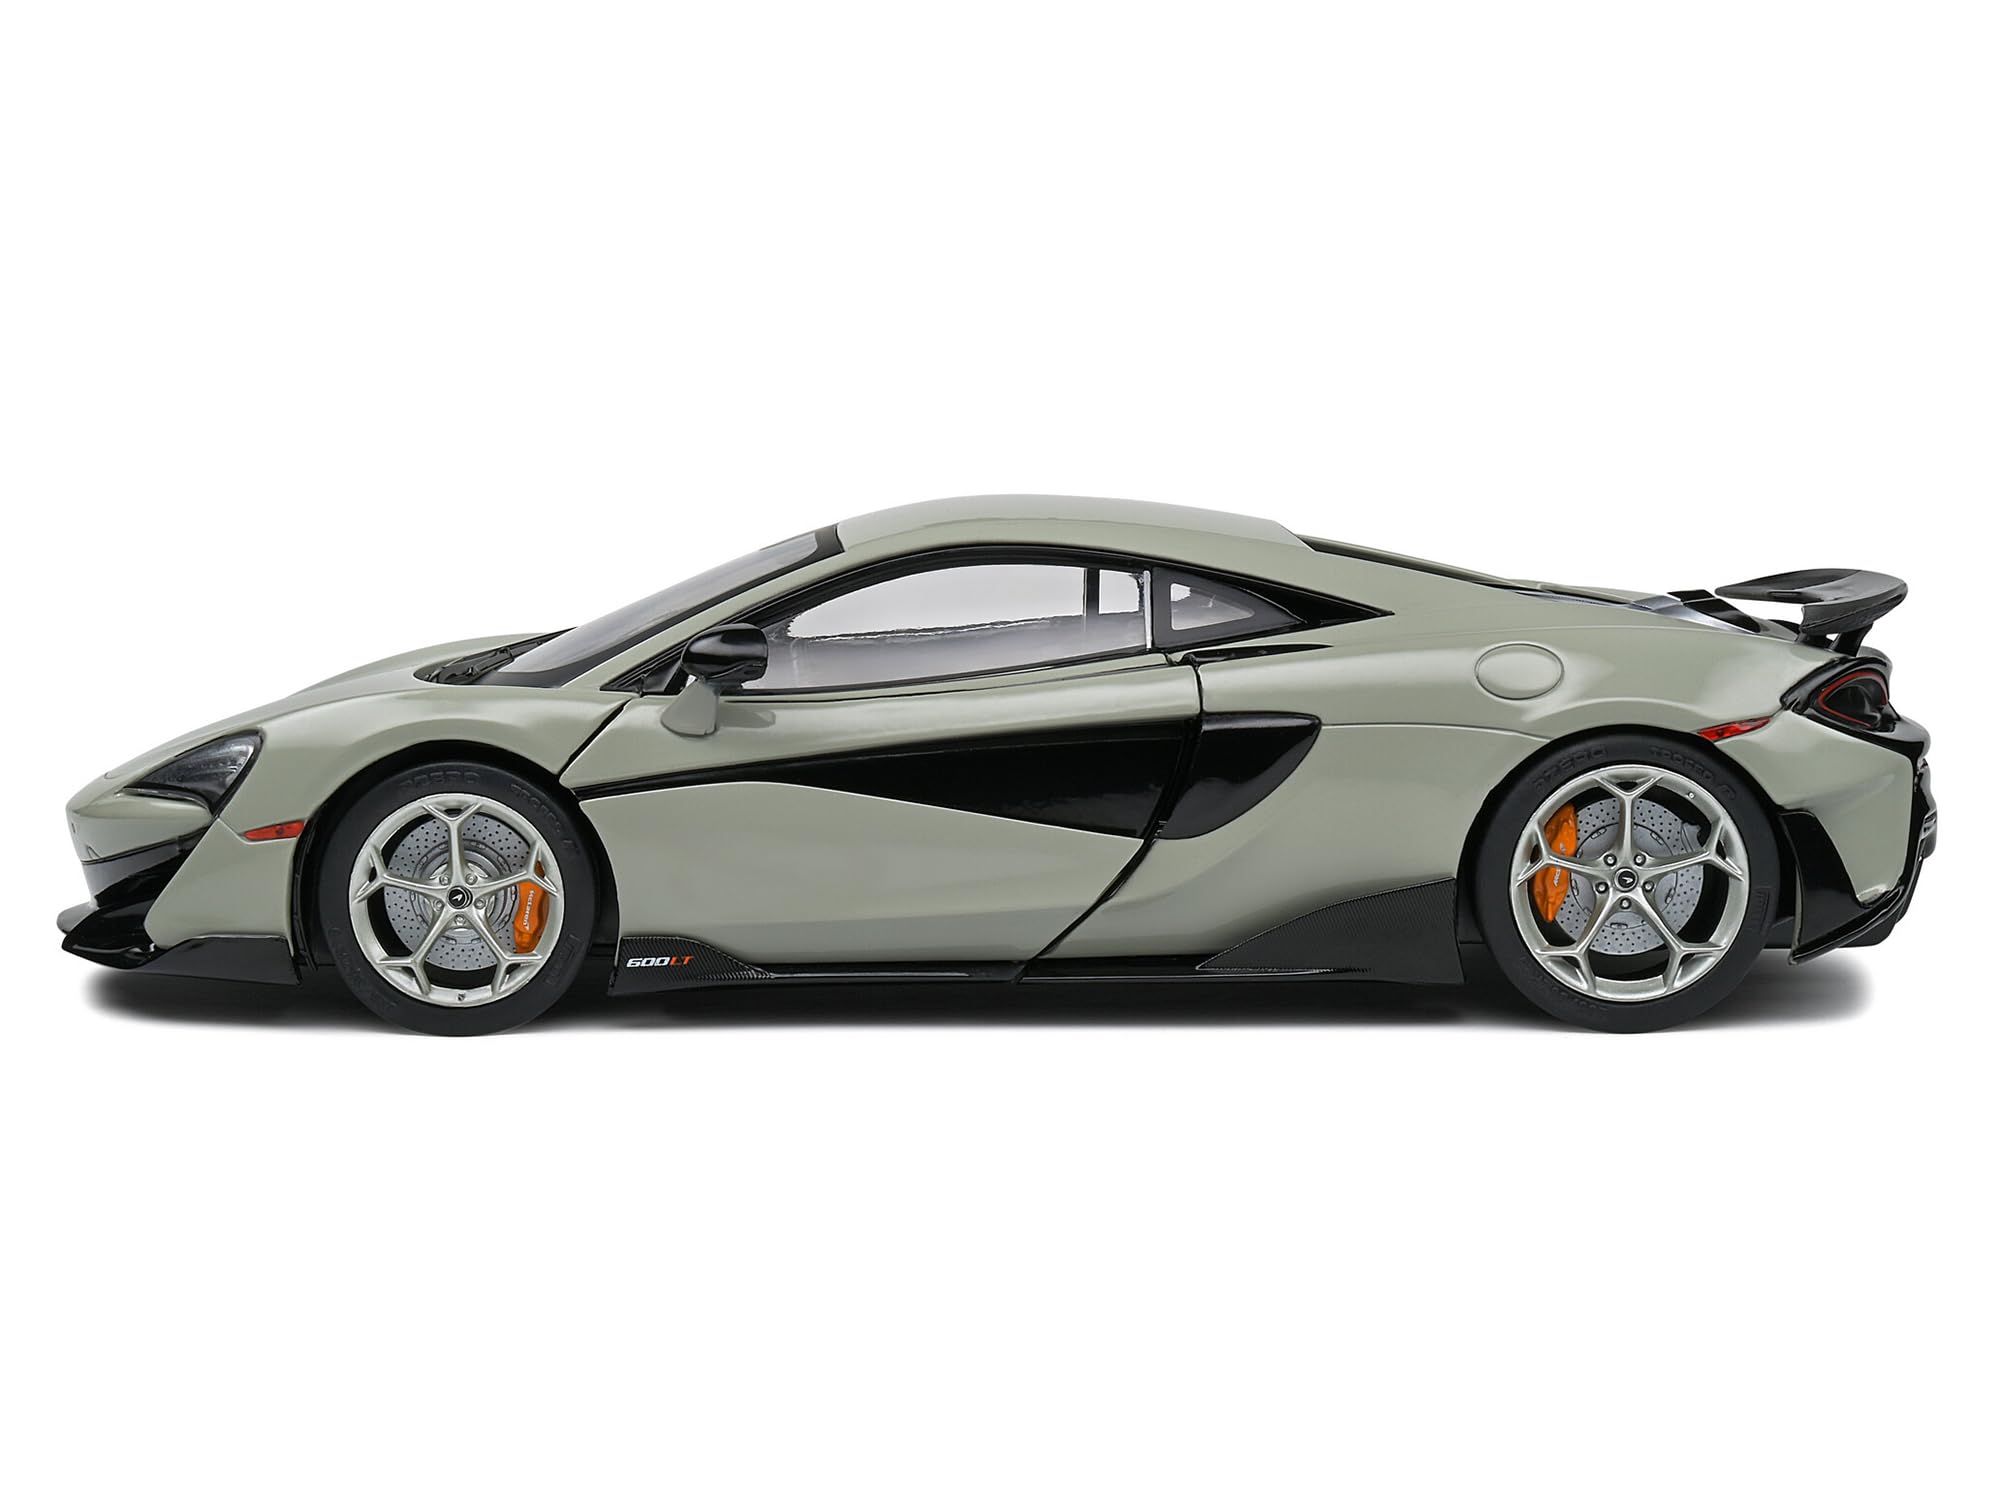 2018 McLaren 600 LT Coupe Blade Silver 1/18 Diecast Model Car by Solido S1804506